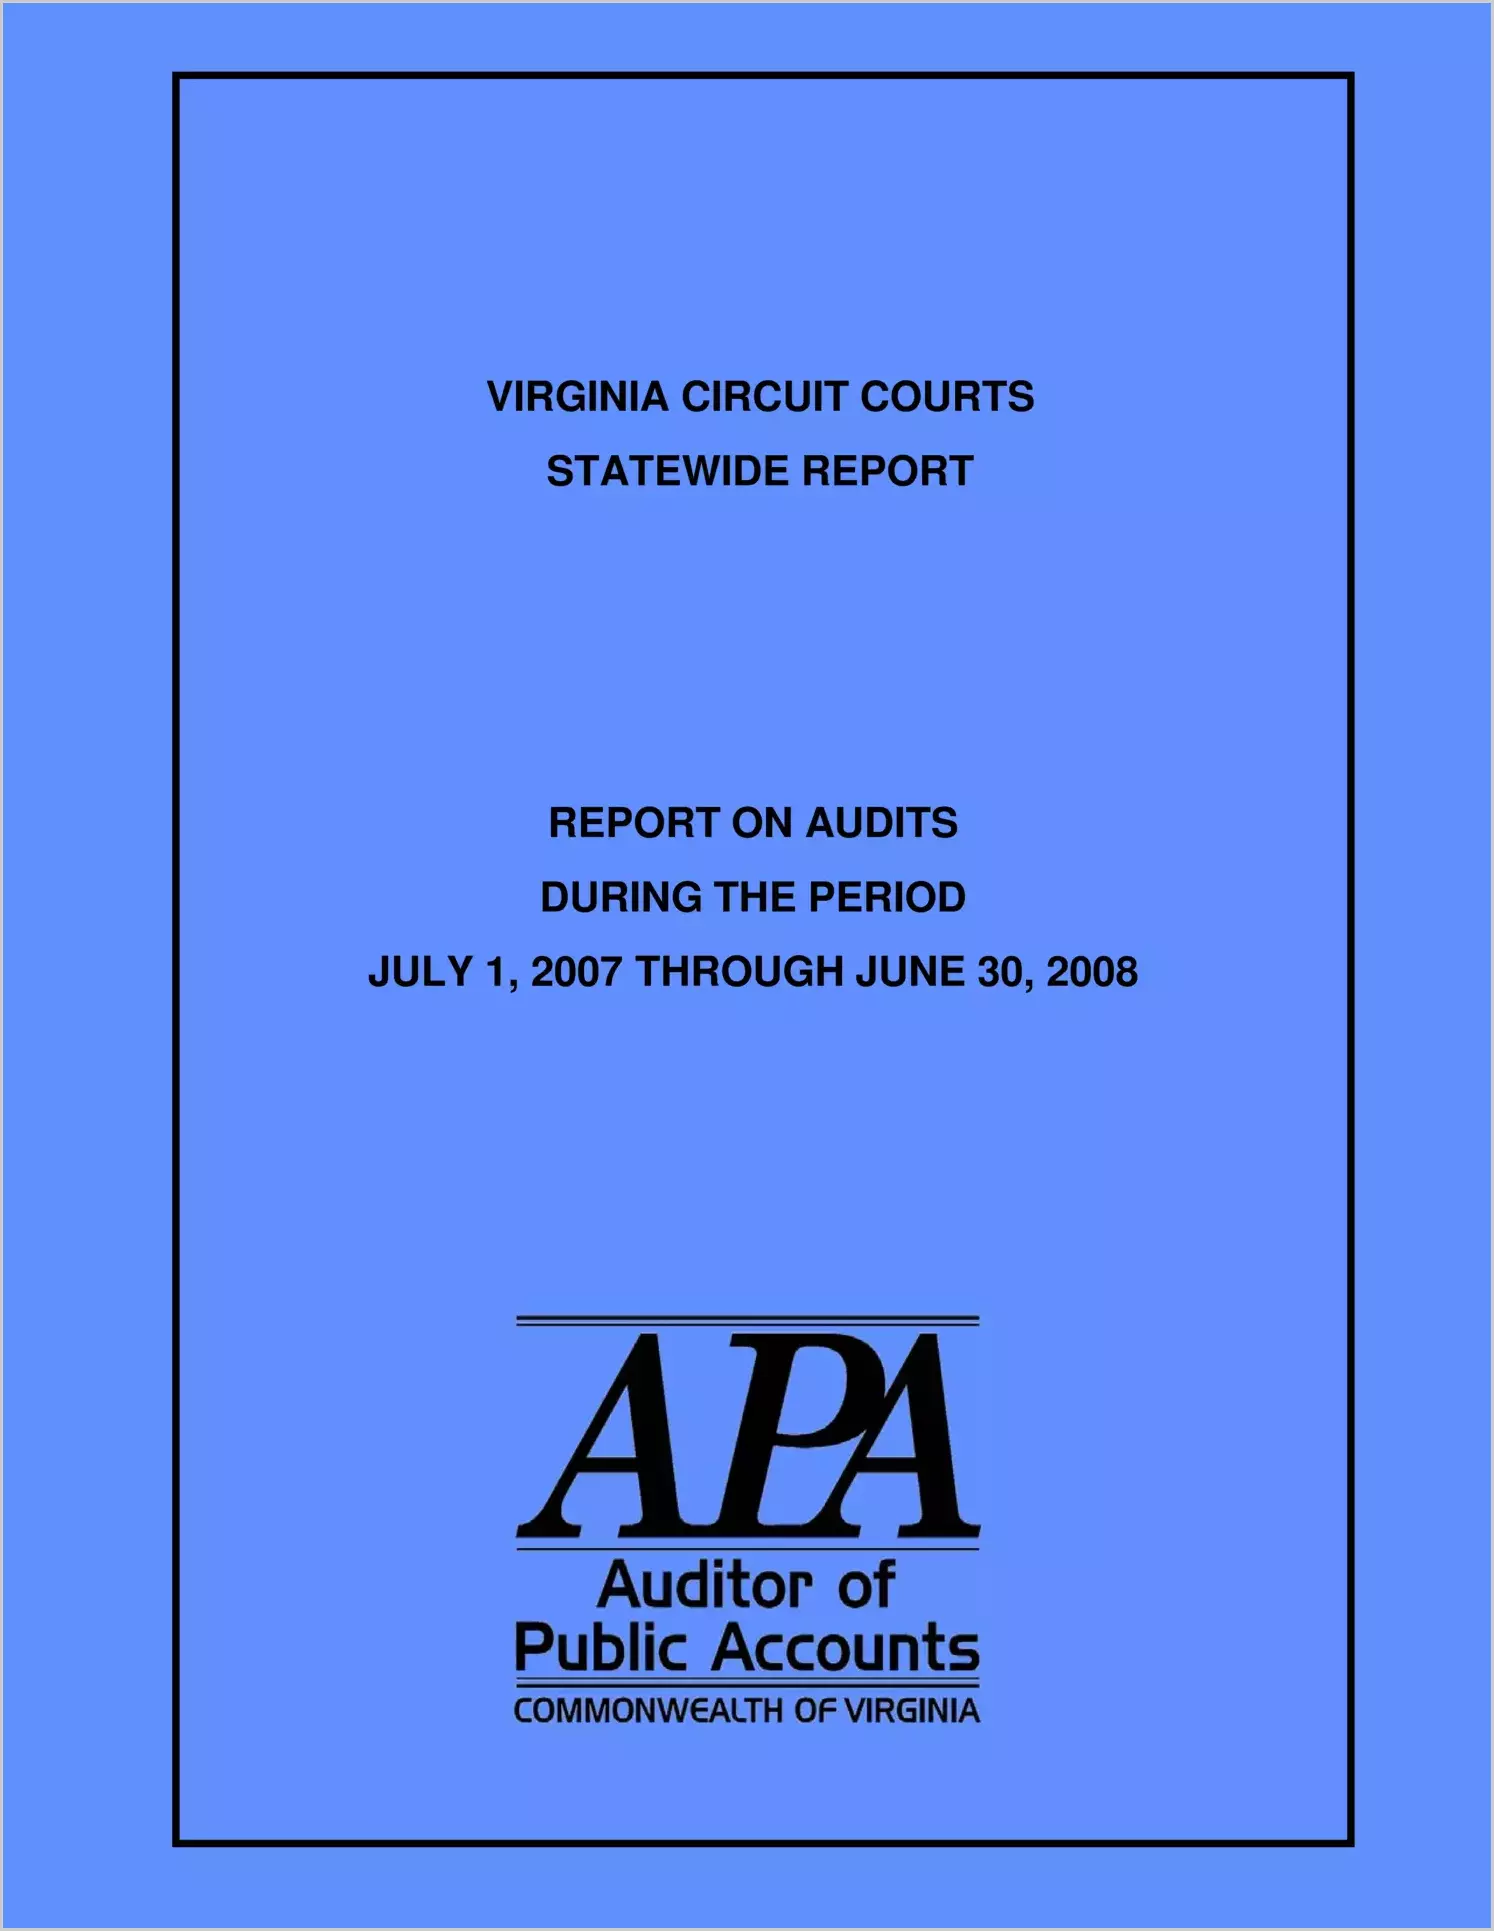 Virginia Circuit Courts Statewide Report on Audits during the period July 1, 2007 through June 30, 2008